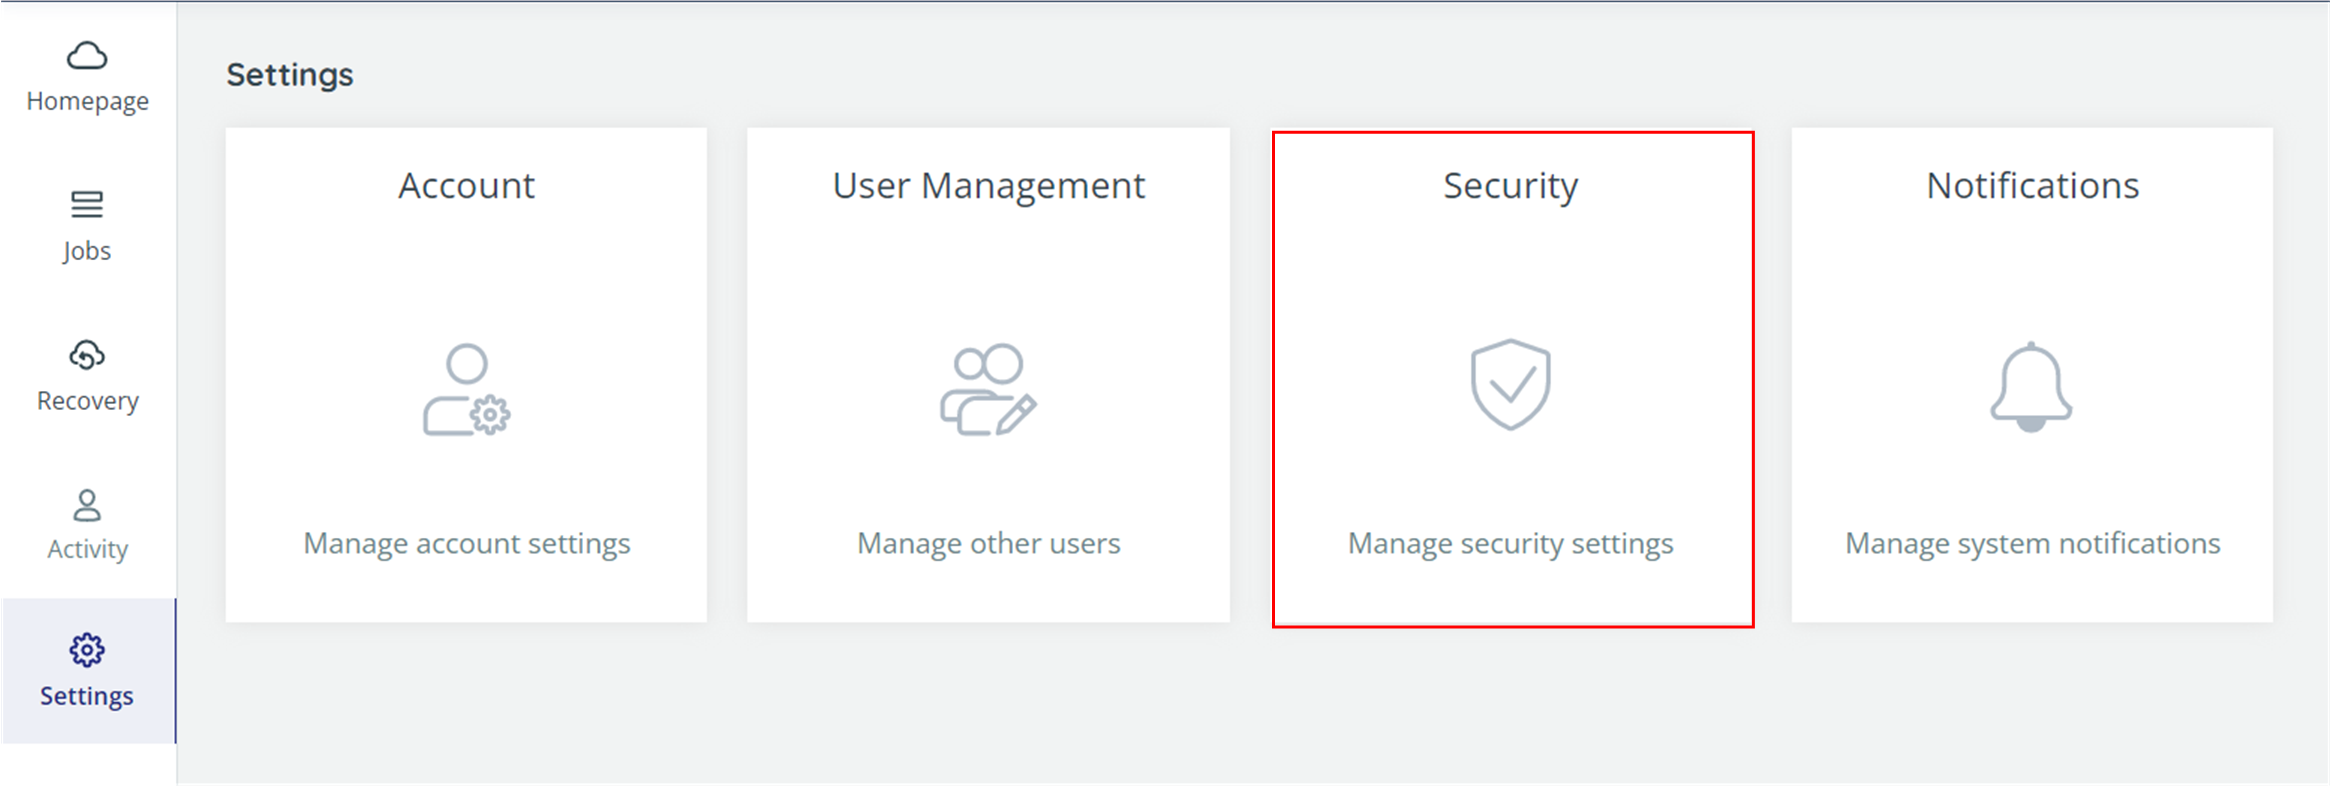 Settings option in the navigation pane, with Security highlighted